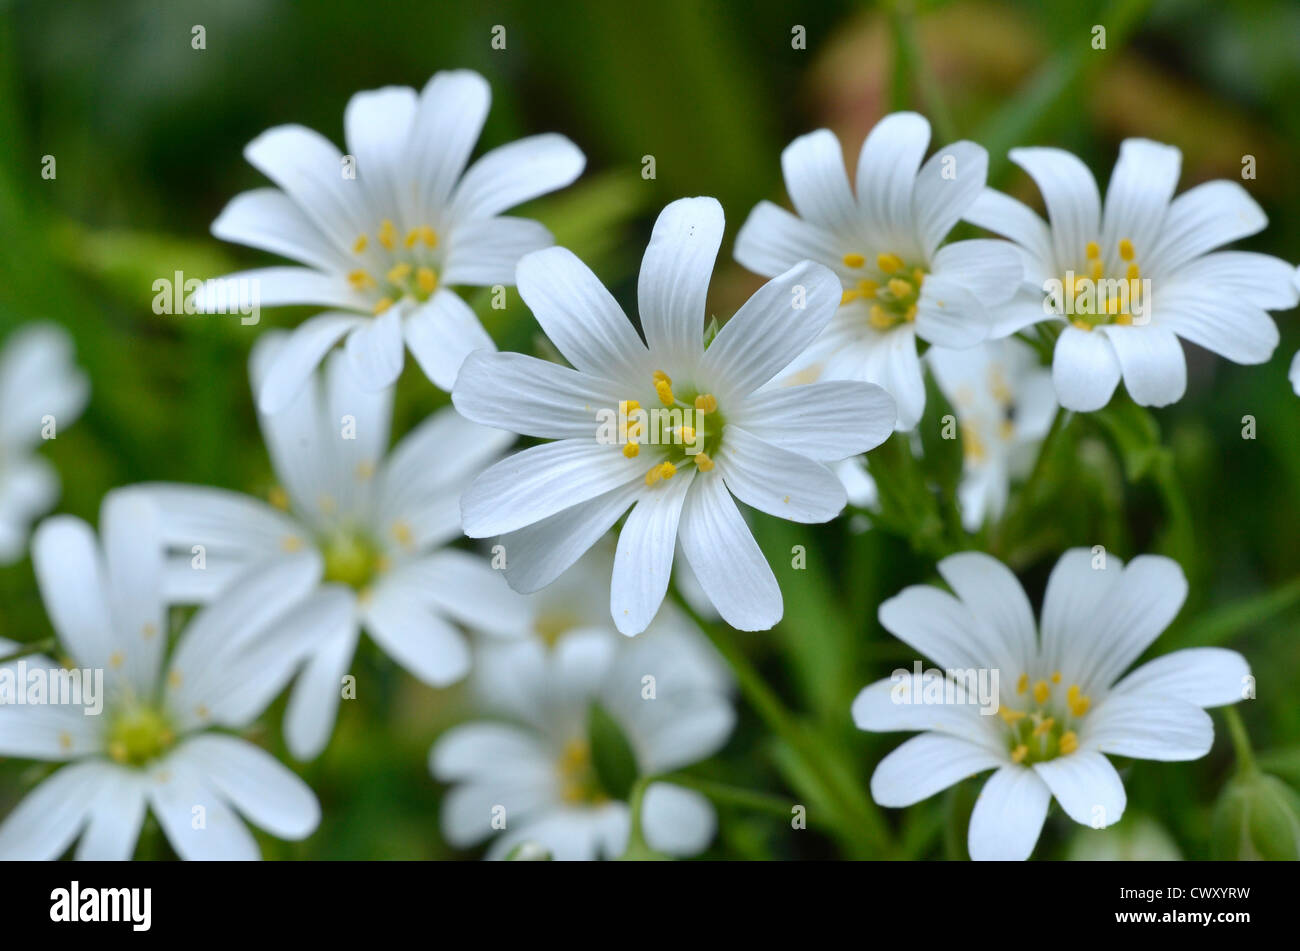 Flowers of Greater Stitchwort / Stellaria holostea. Former medicinal plant used in herbal remedies. Stock Photo